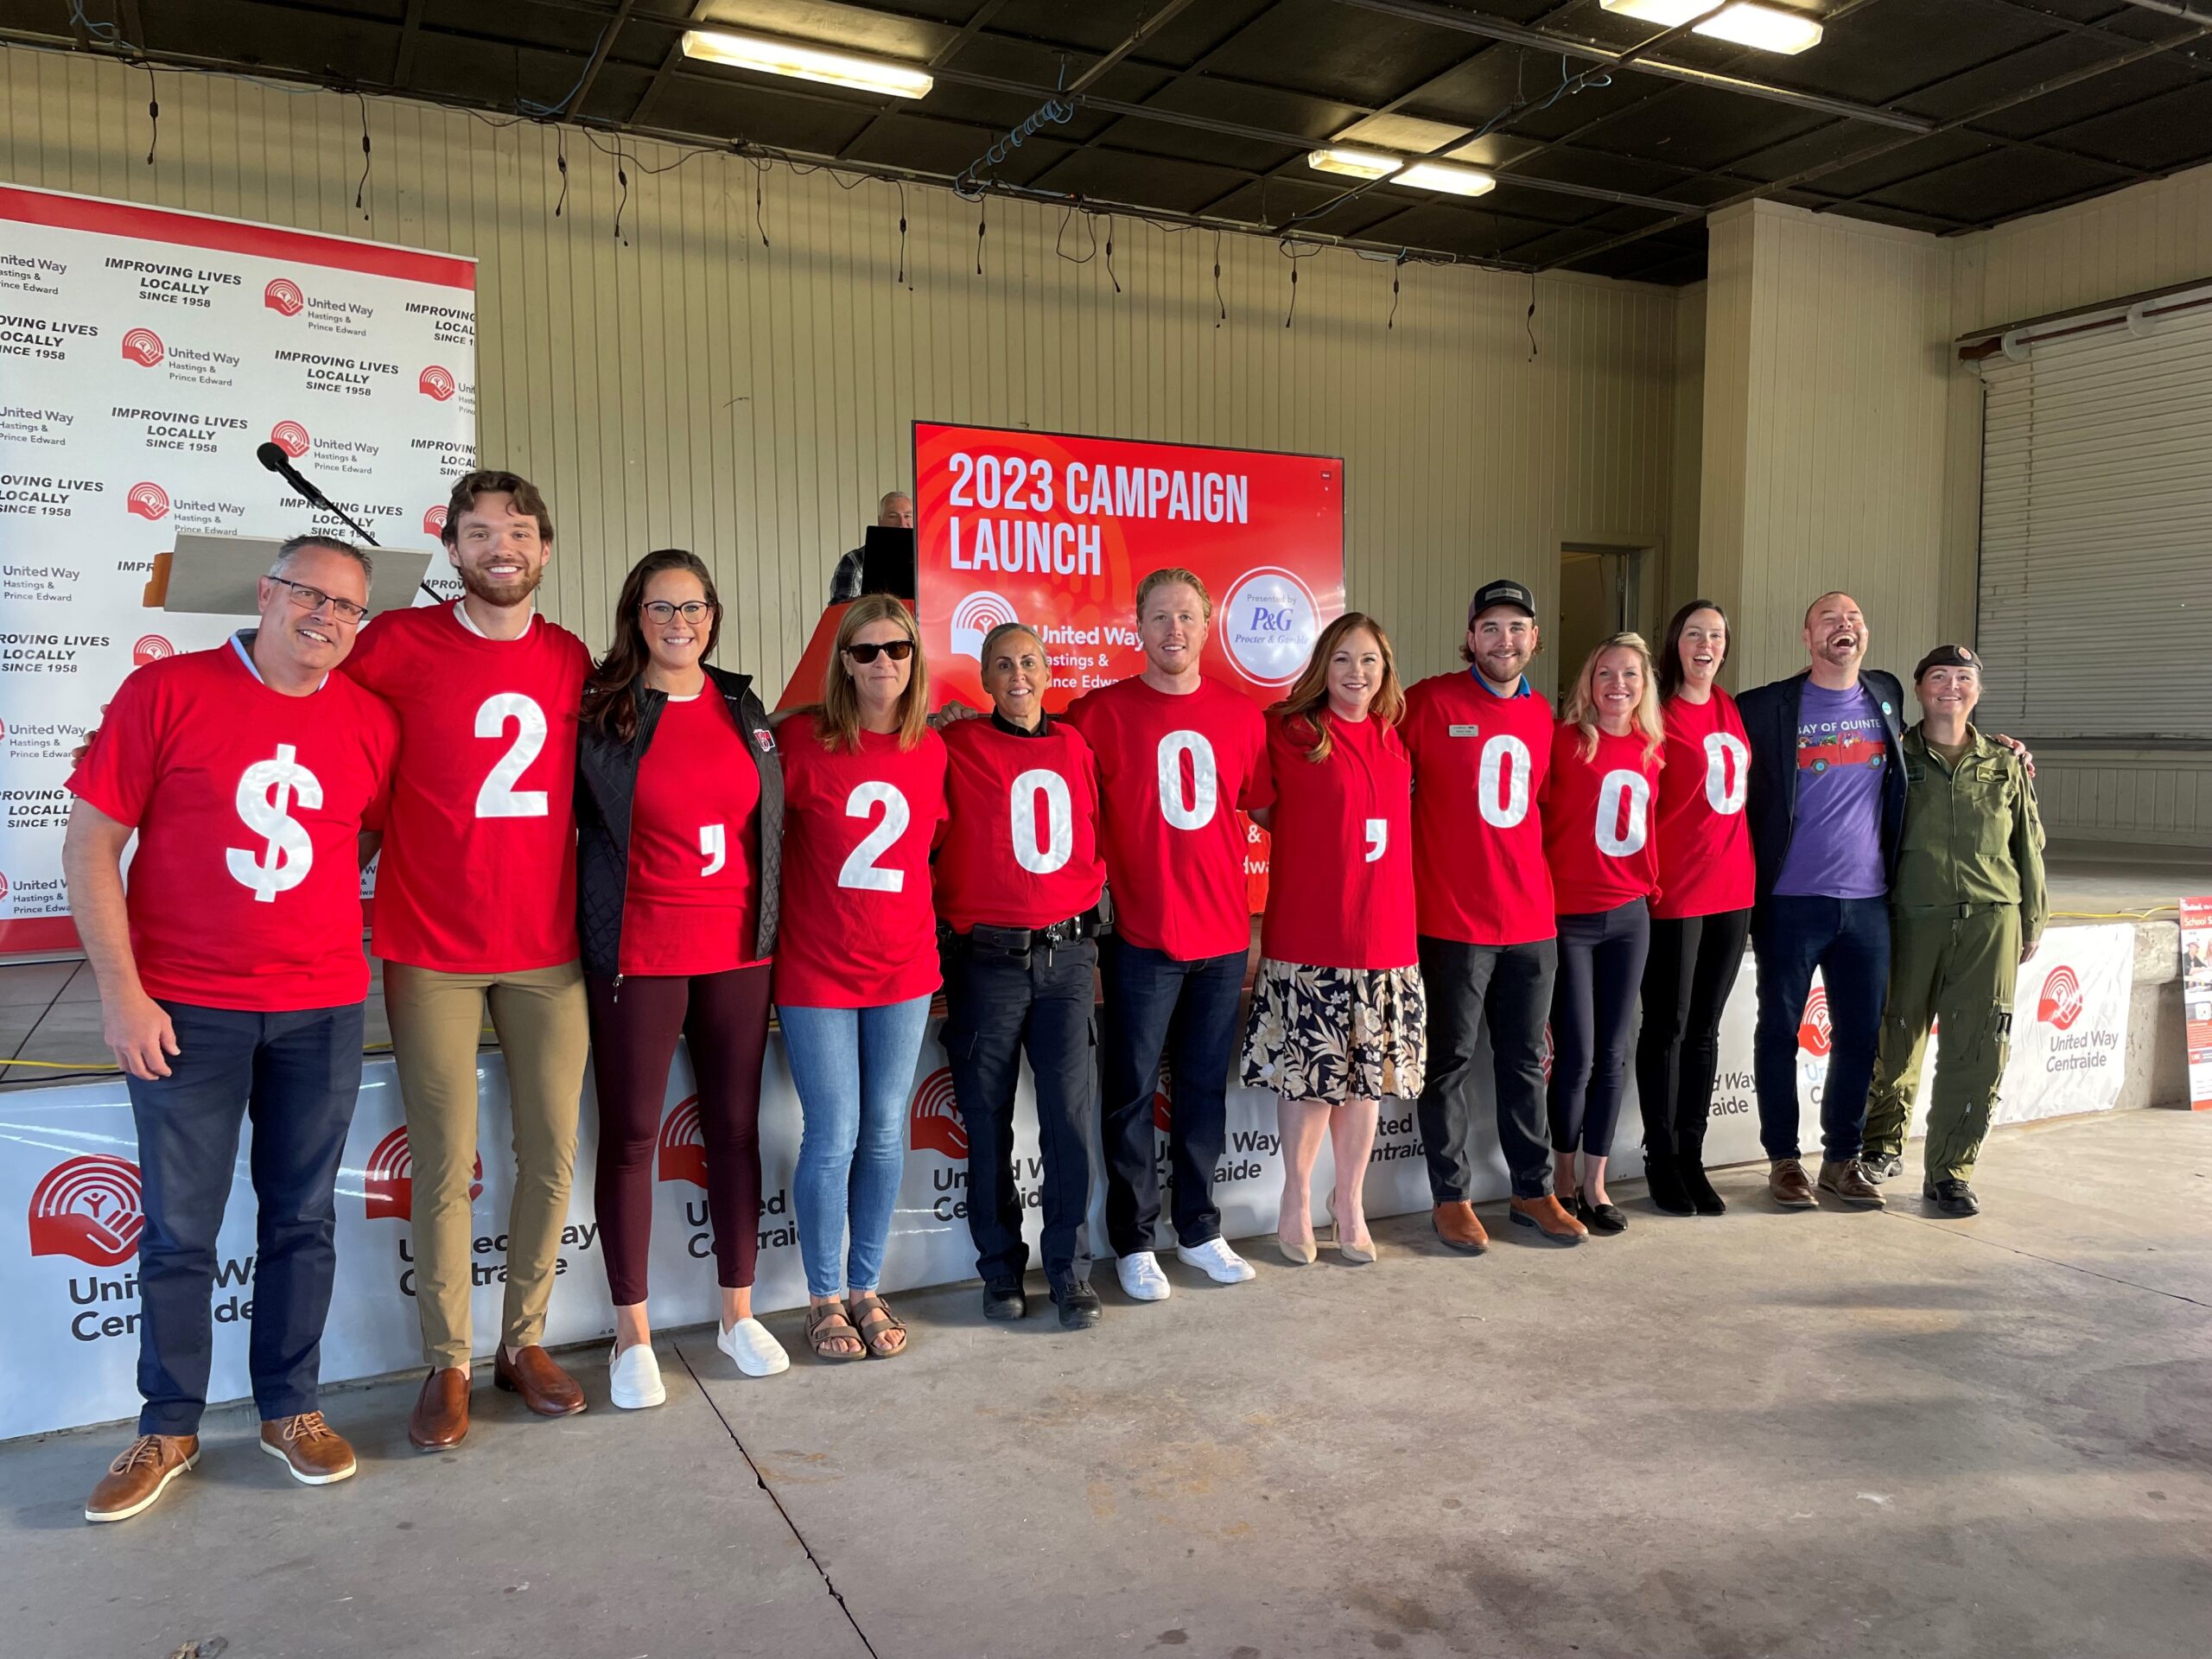 a large group of people wearing red shirts, each with a number printed on them to show $2 million, the campaign goal of the united way hastings and prince edward